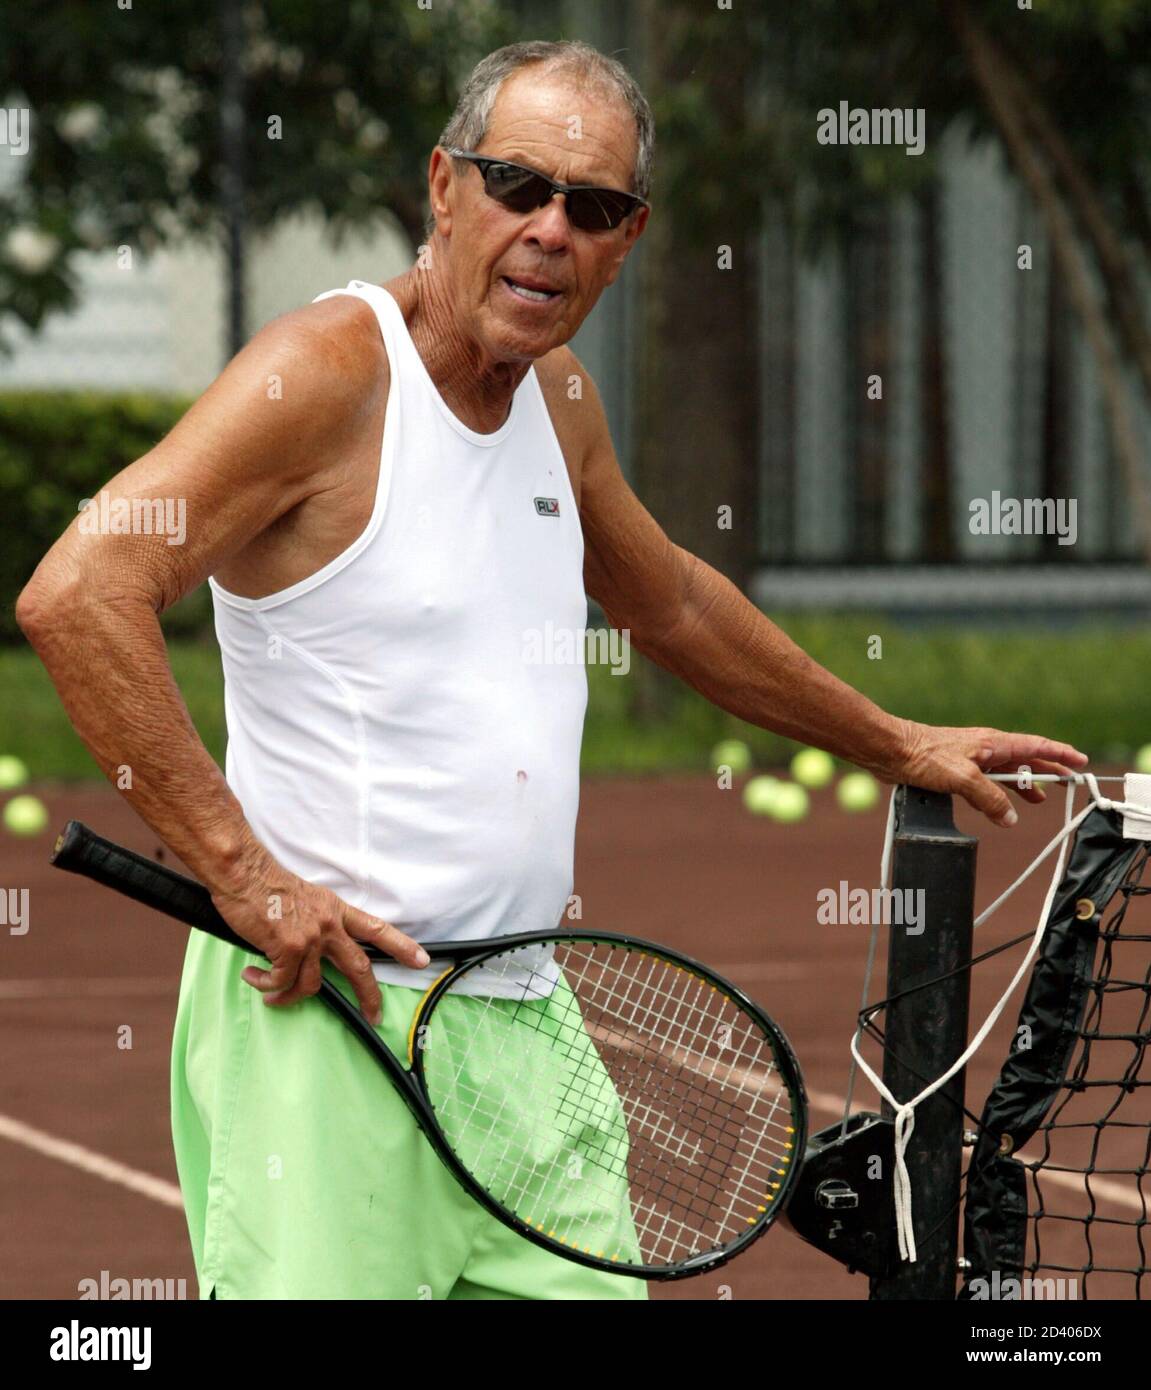 Nick Bollettieri gives instructions during practice with his students at  the Nick Bollettieri Tennis Academy in Bradenton, Florida in July 12, 2004. Bollettieri  Academy as trained past champions [Andre Agassi, Monica Seles,